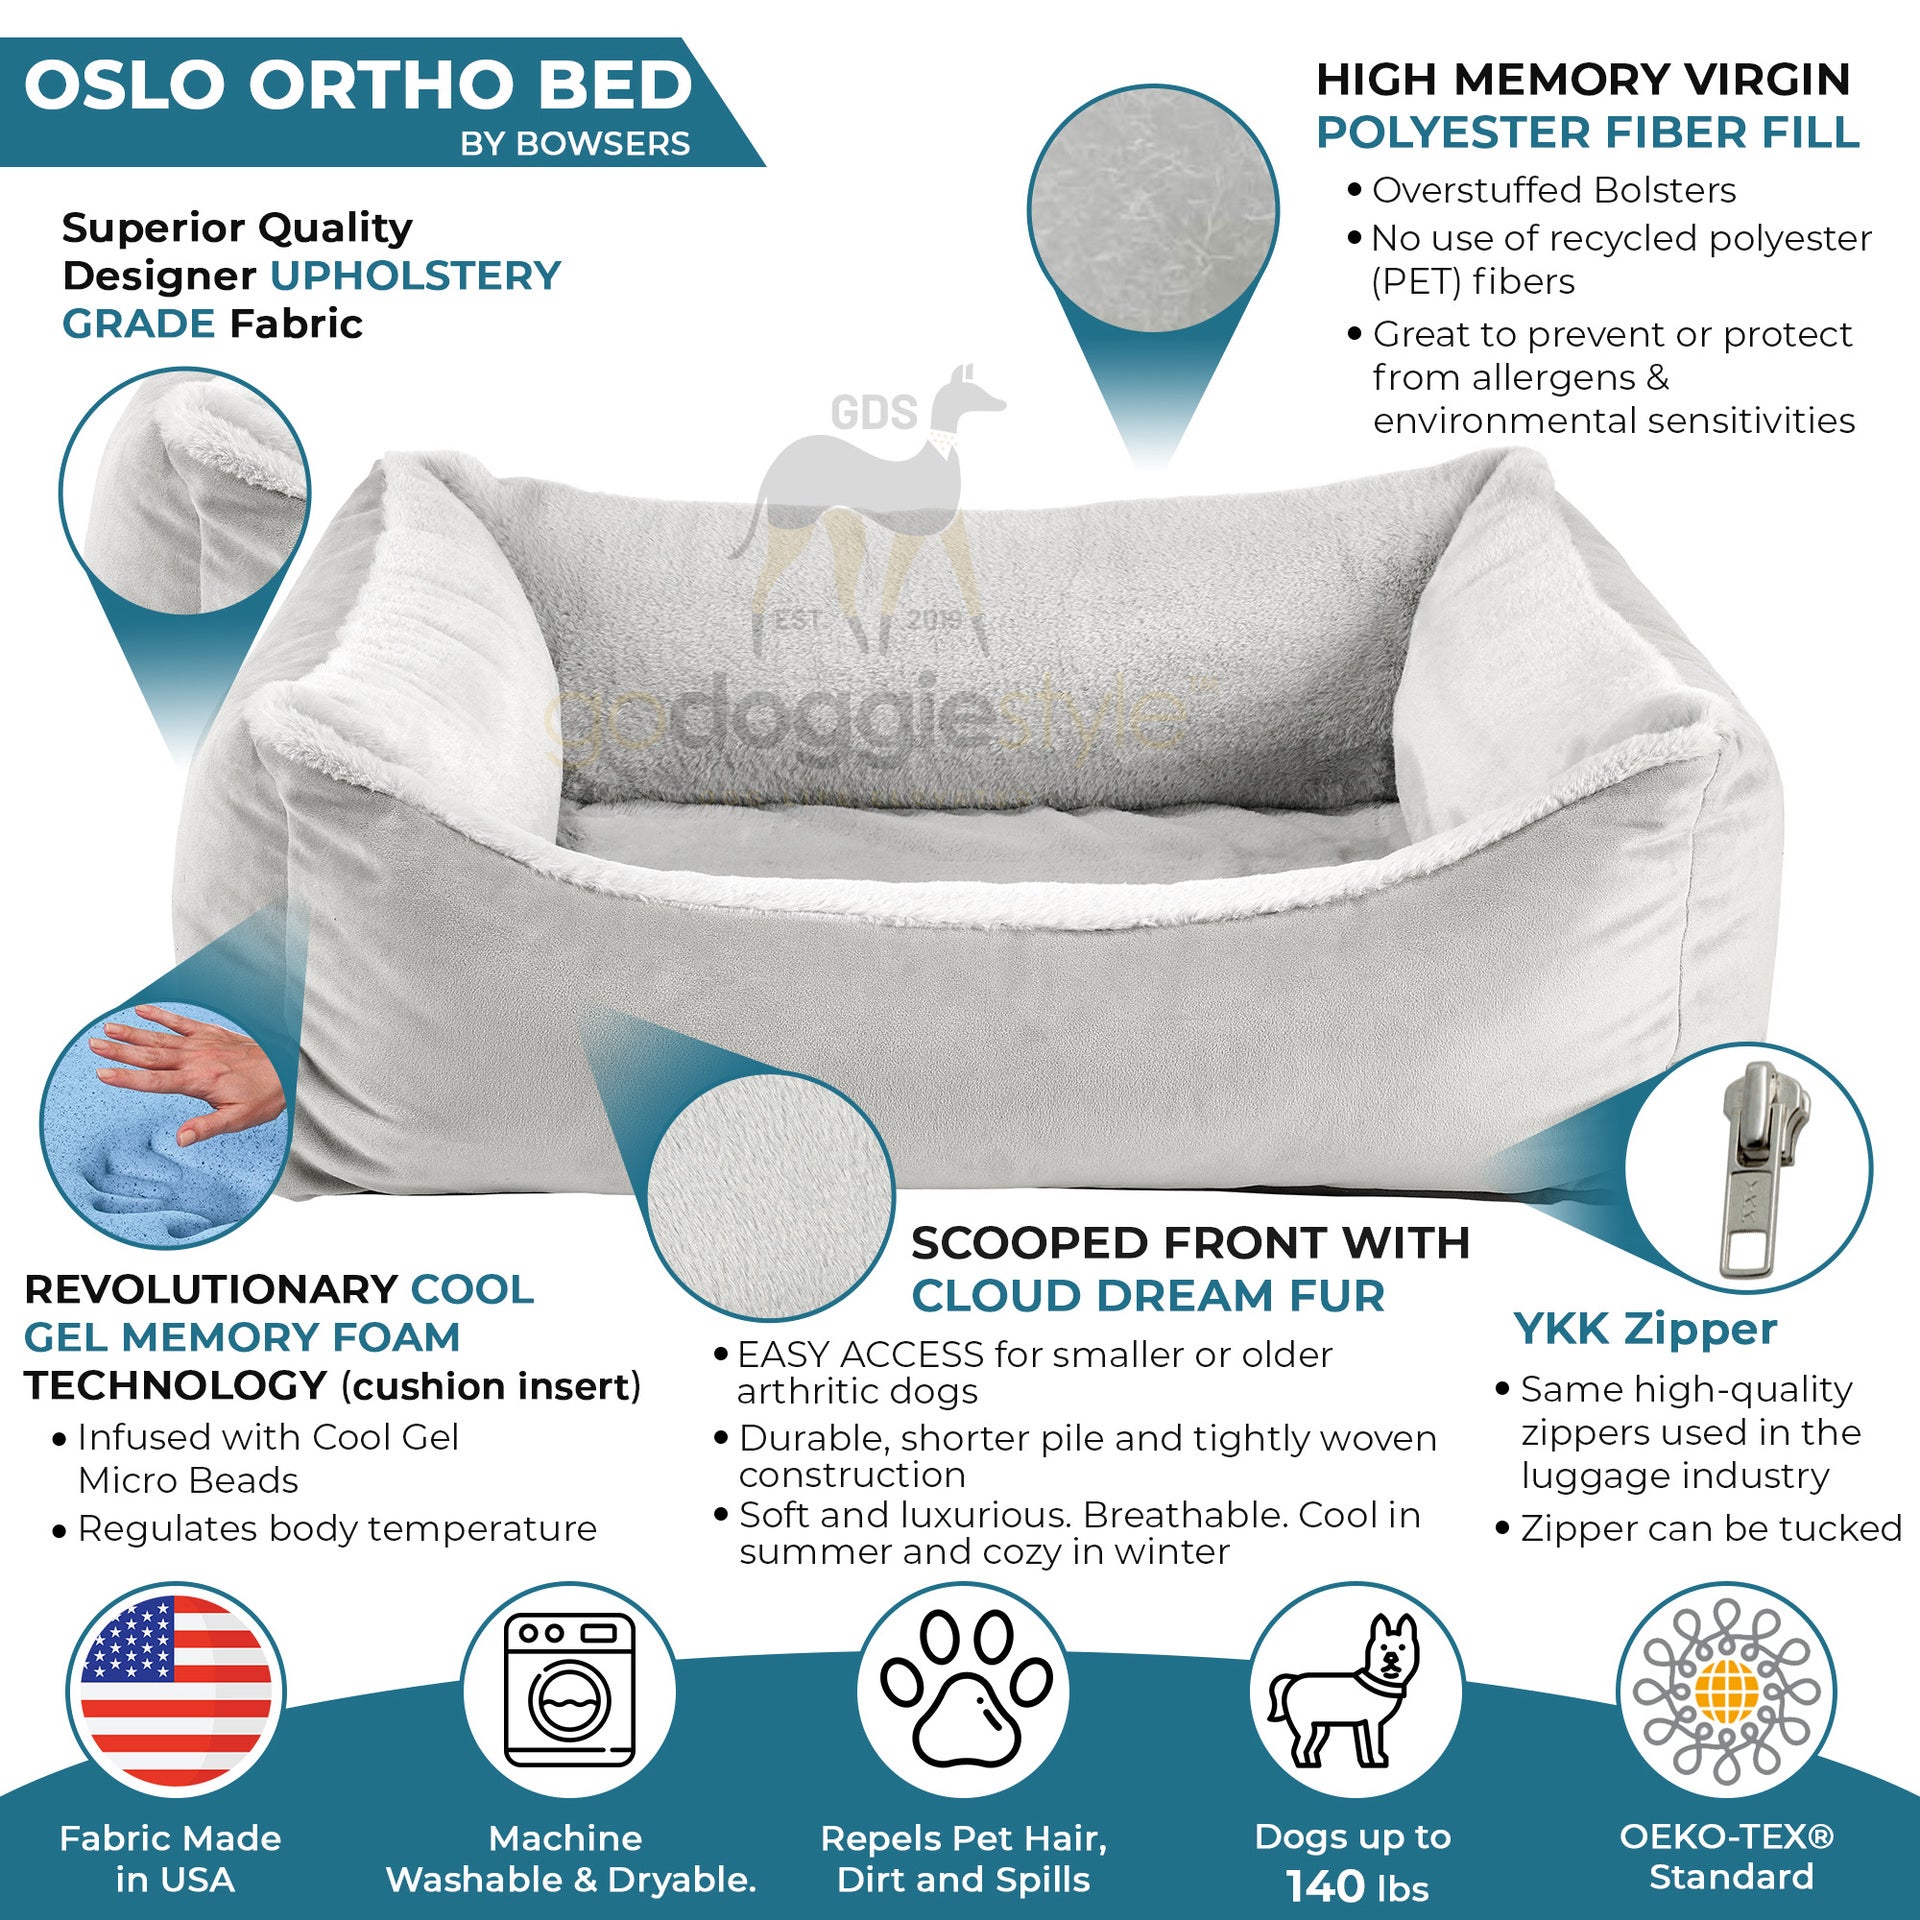 Oslo Ortho Bed Info Graphic